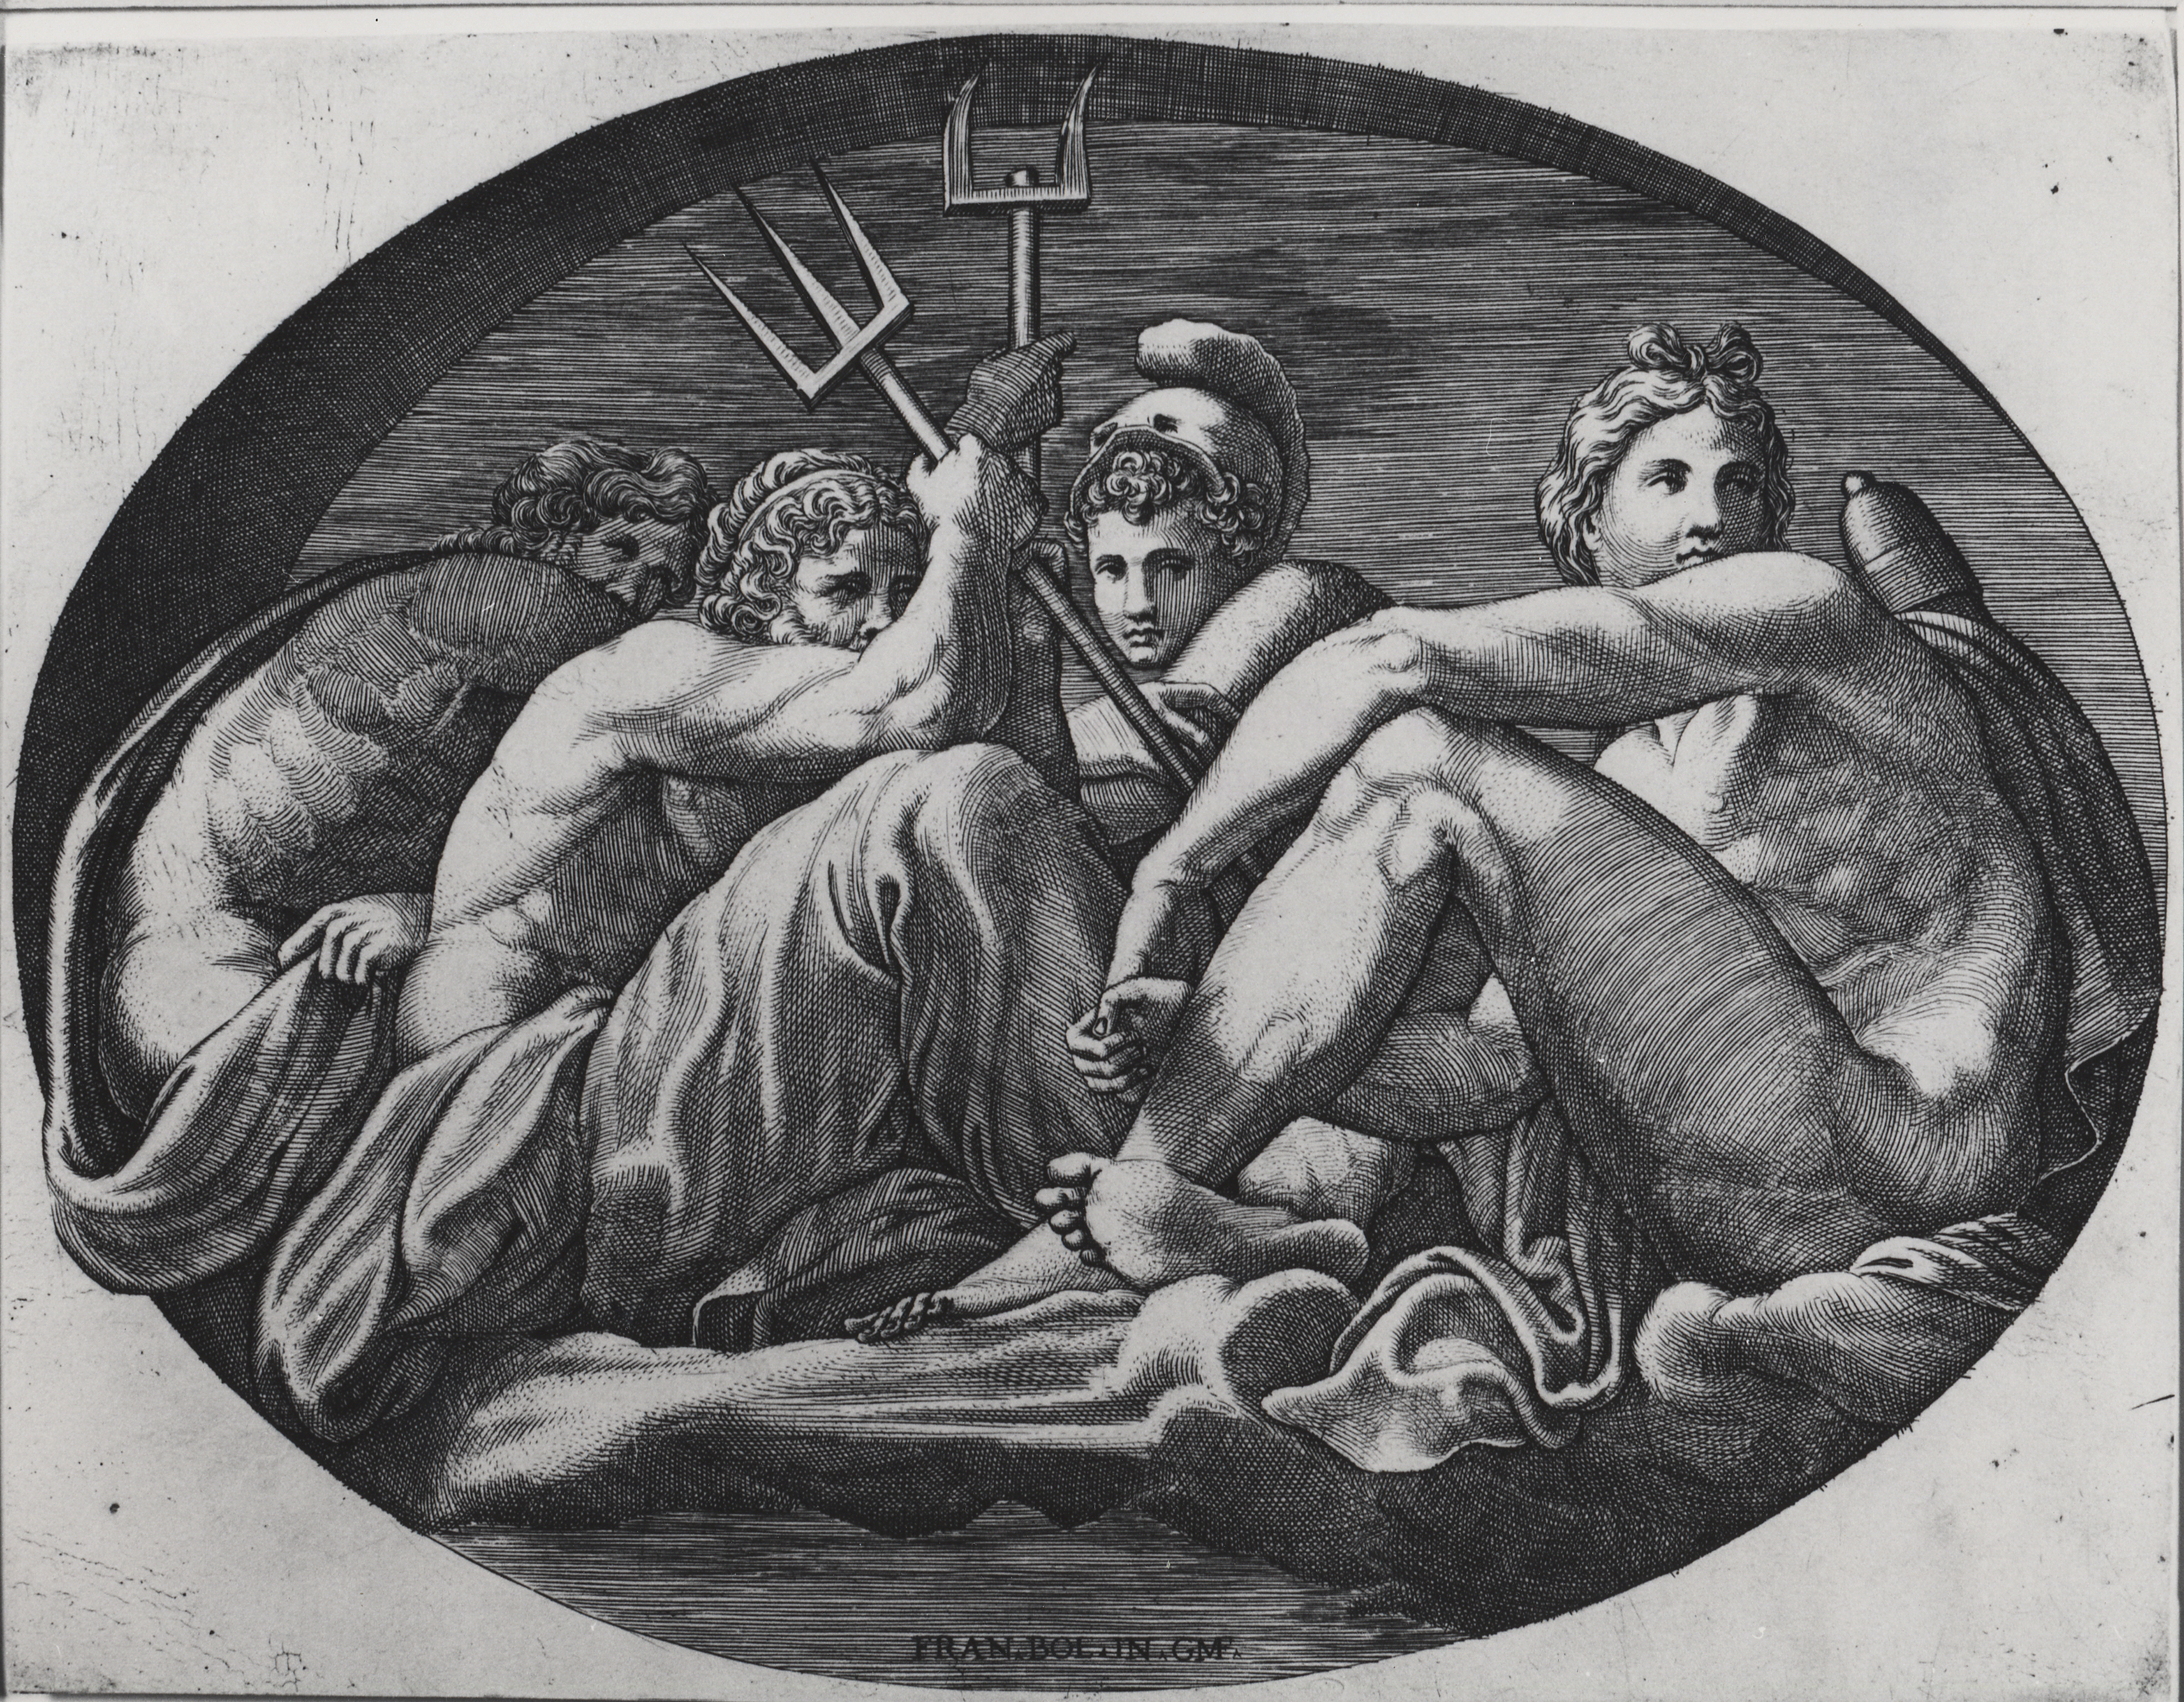 Drawing of Apollo, Neptune, Pluto, and Pallas sitting on the ground all looking to the right of the image